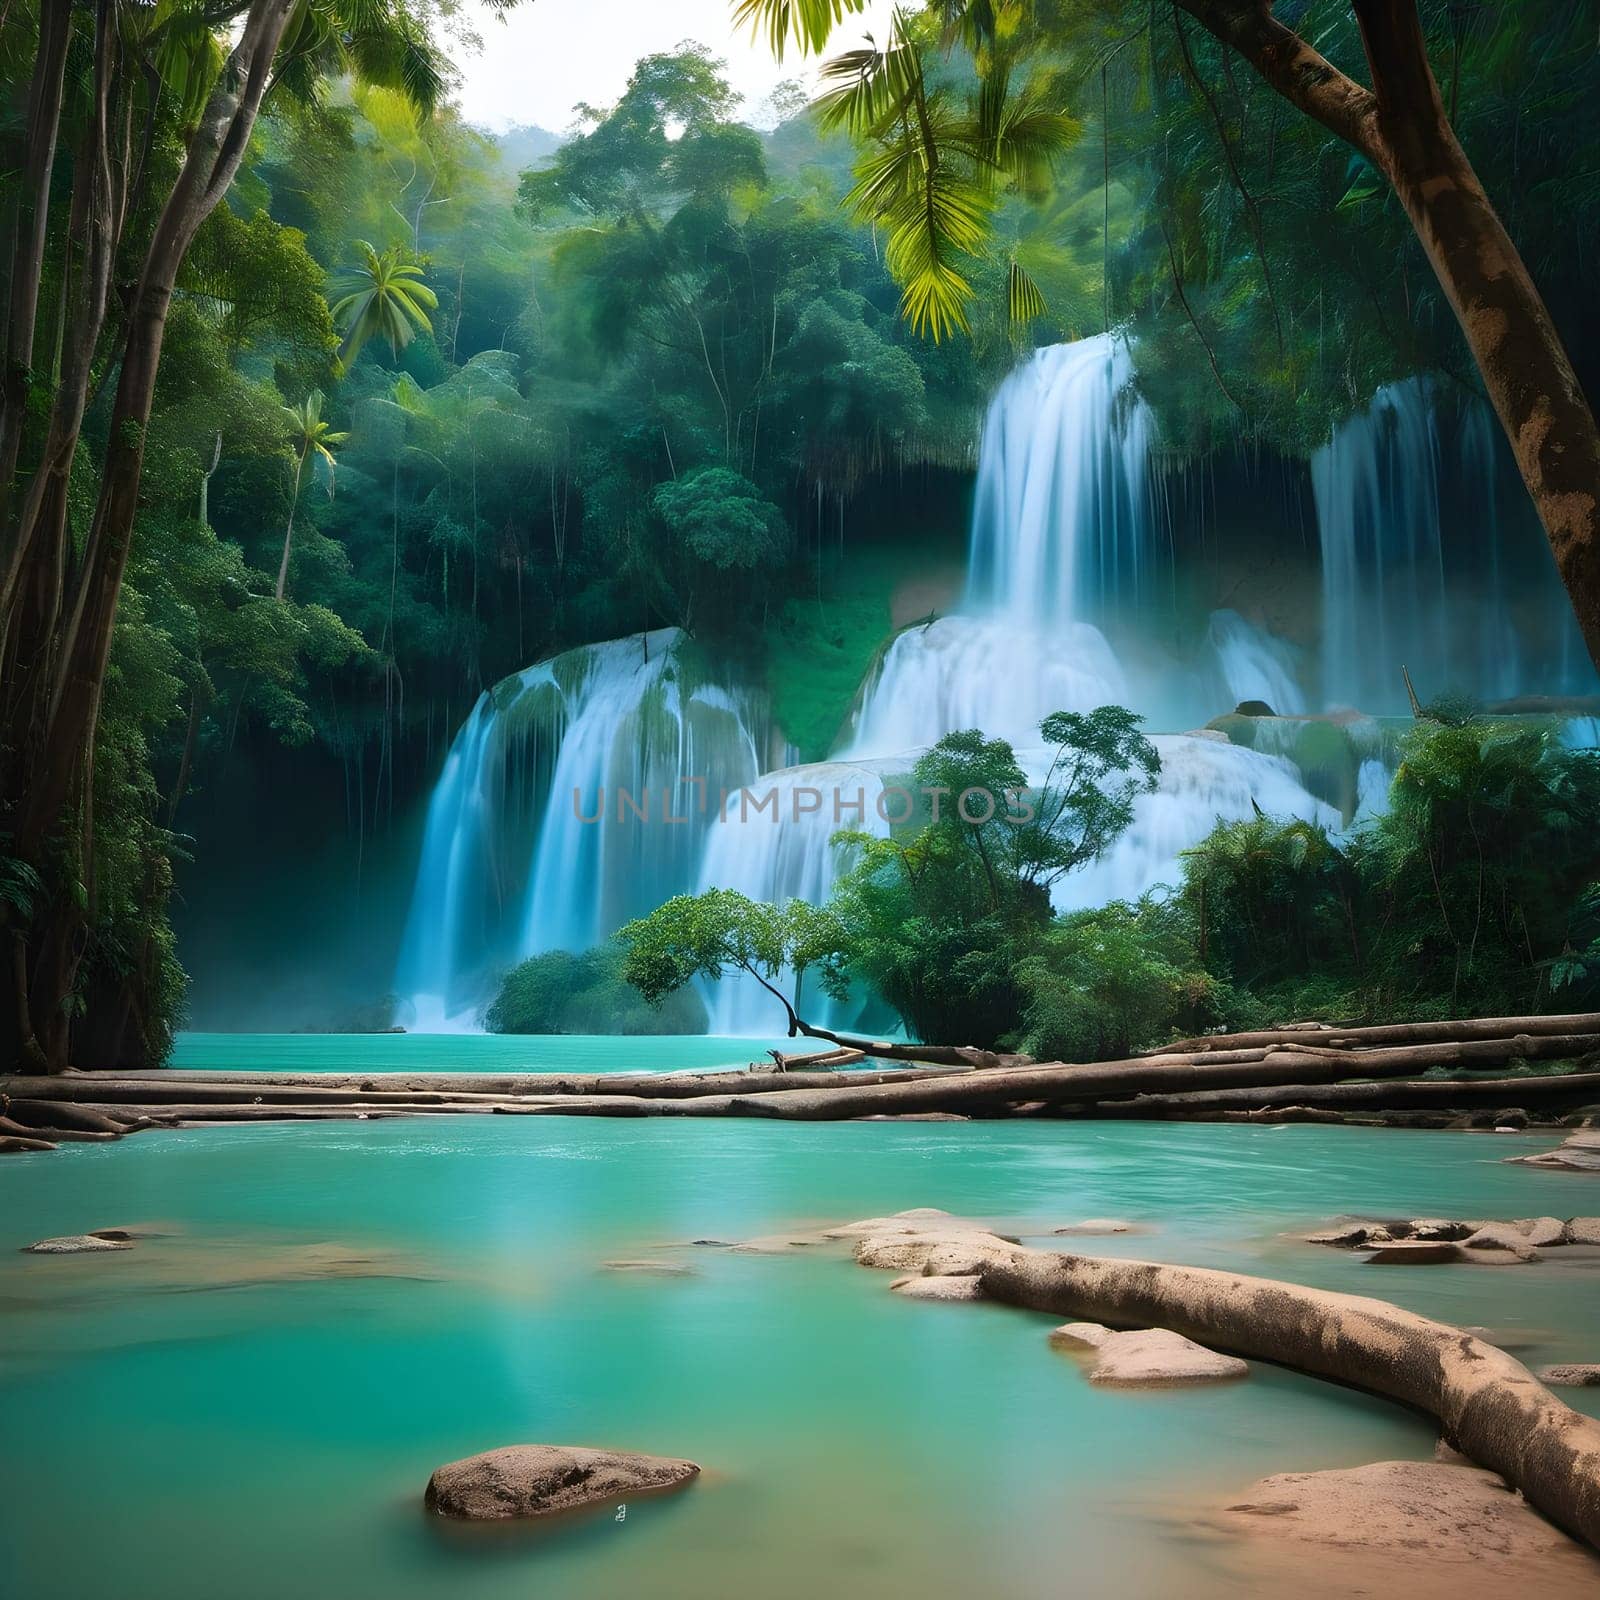 Serenade of Nature: Cascading Waters in the Tropical Rainforest by Petrichor